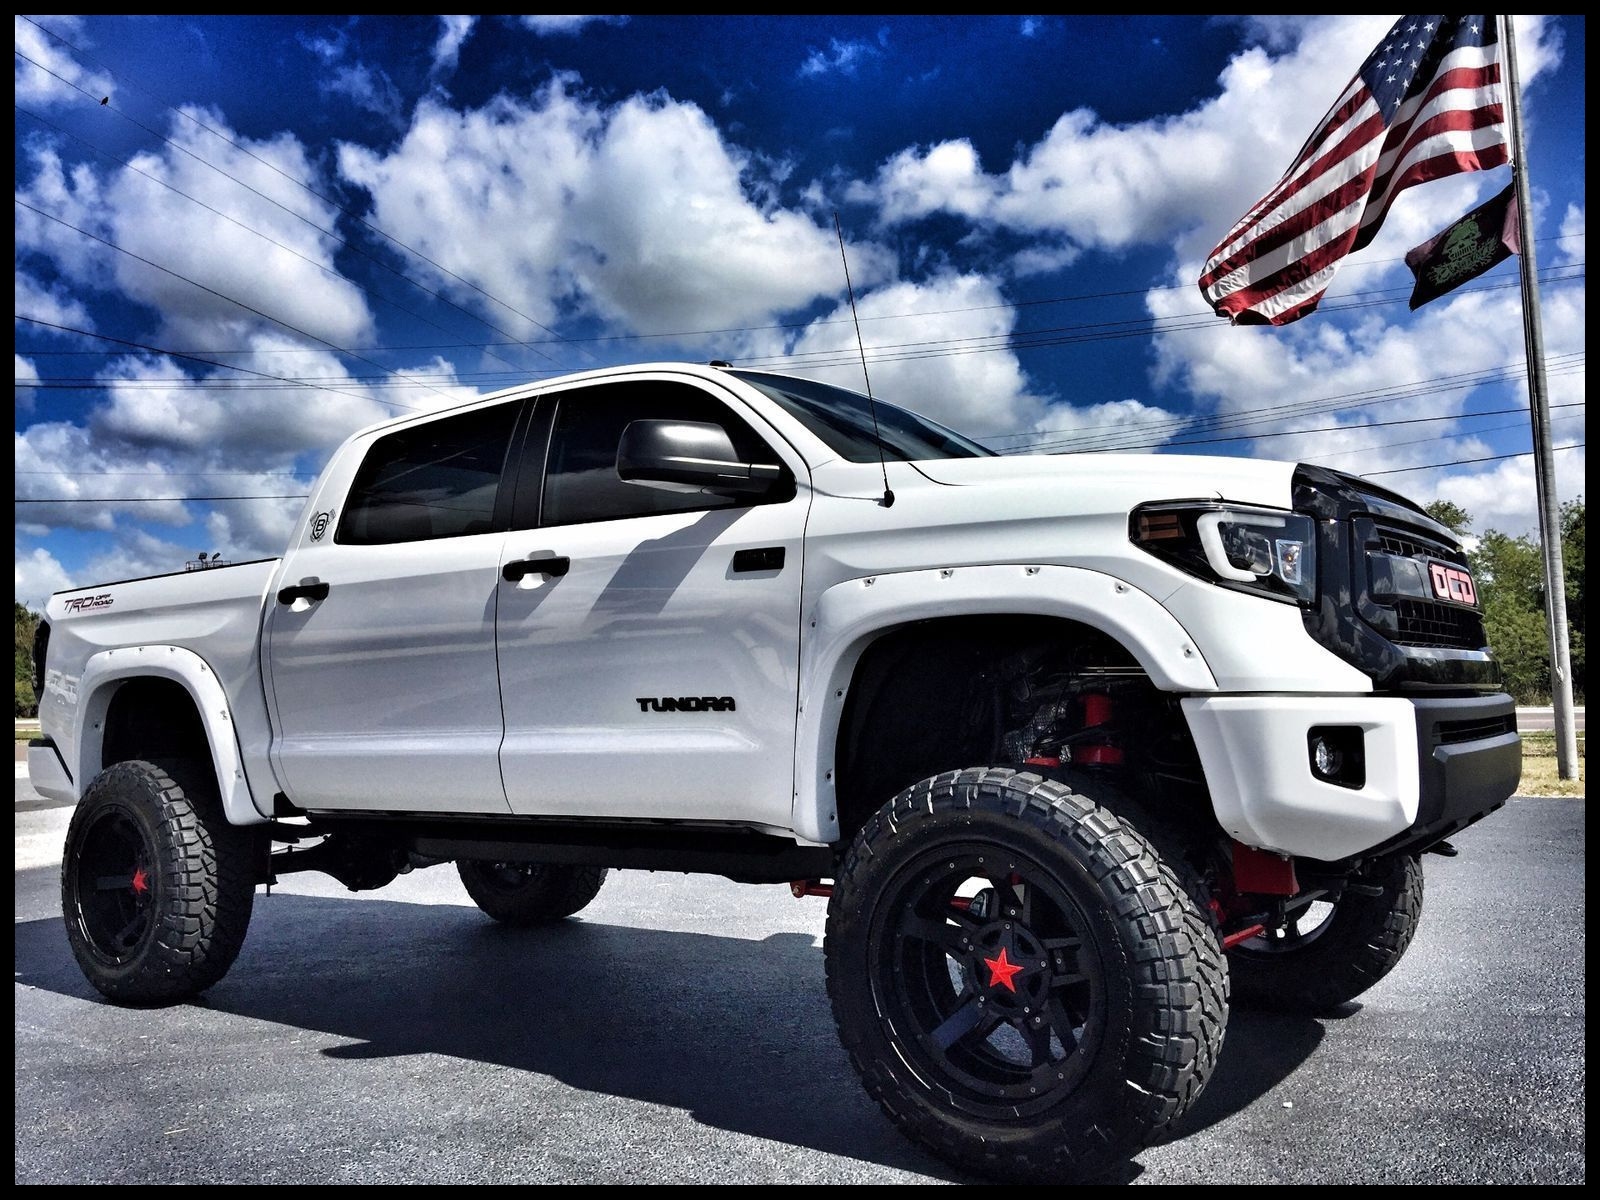 Special Awesome Great 2017 toyota Tundra Custom Lifted Leather Crewmax 4x4 Review and Specs